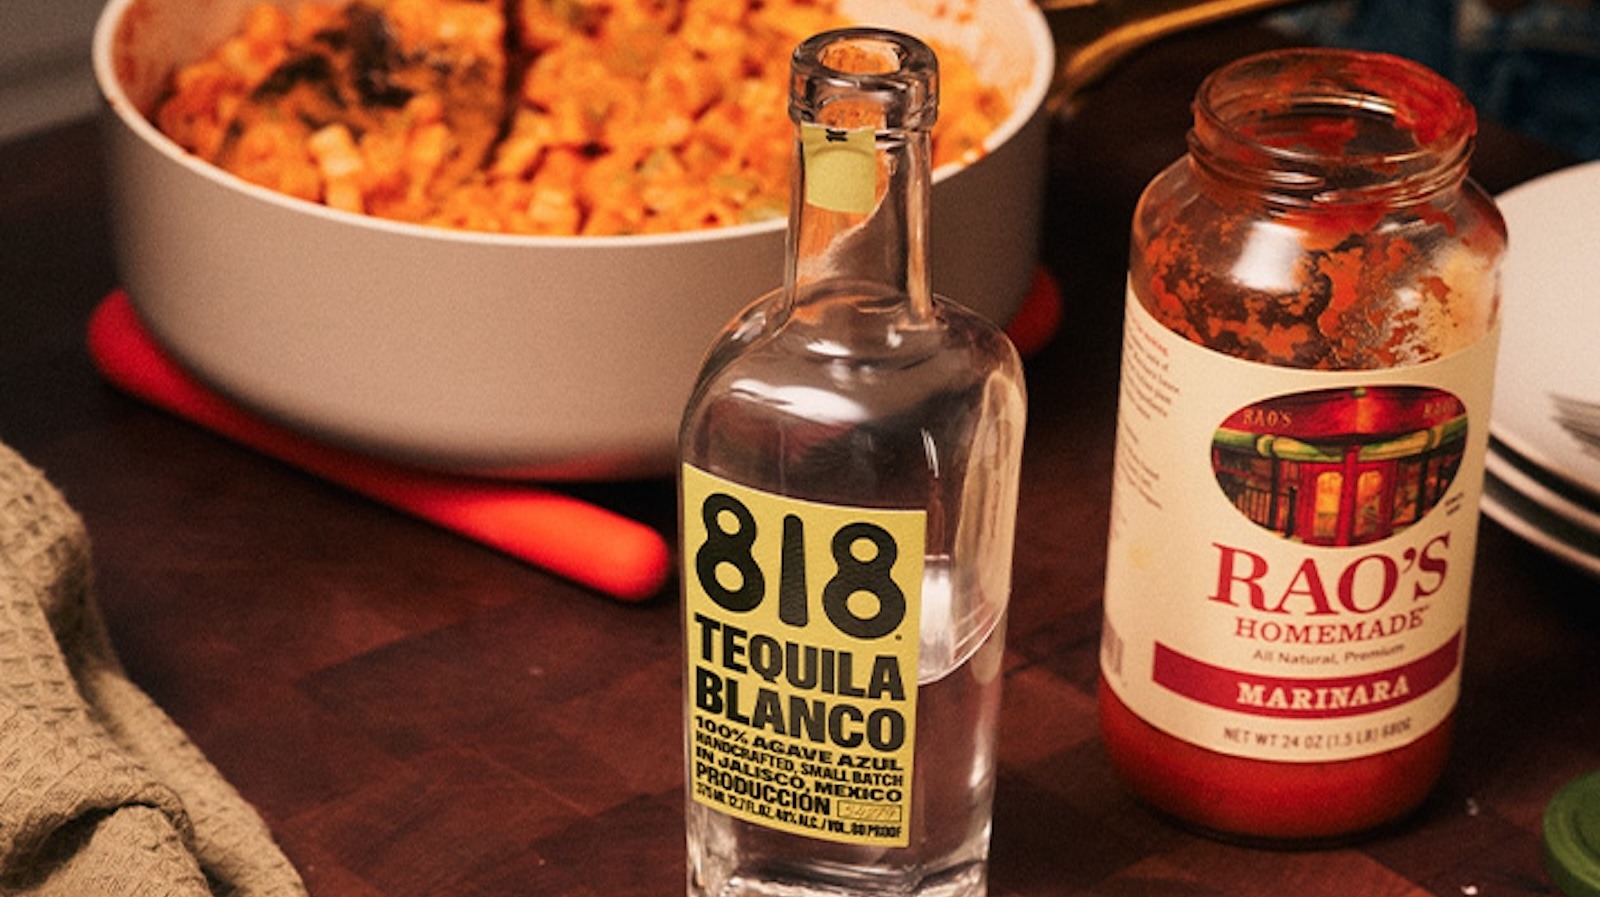 Rao's Teams Up With 818 Tequila For A Limited-Edition Boozy 